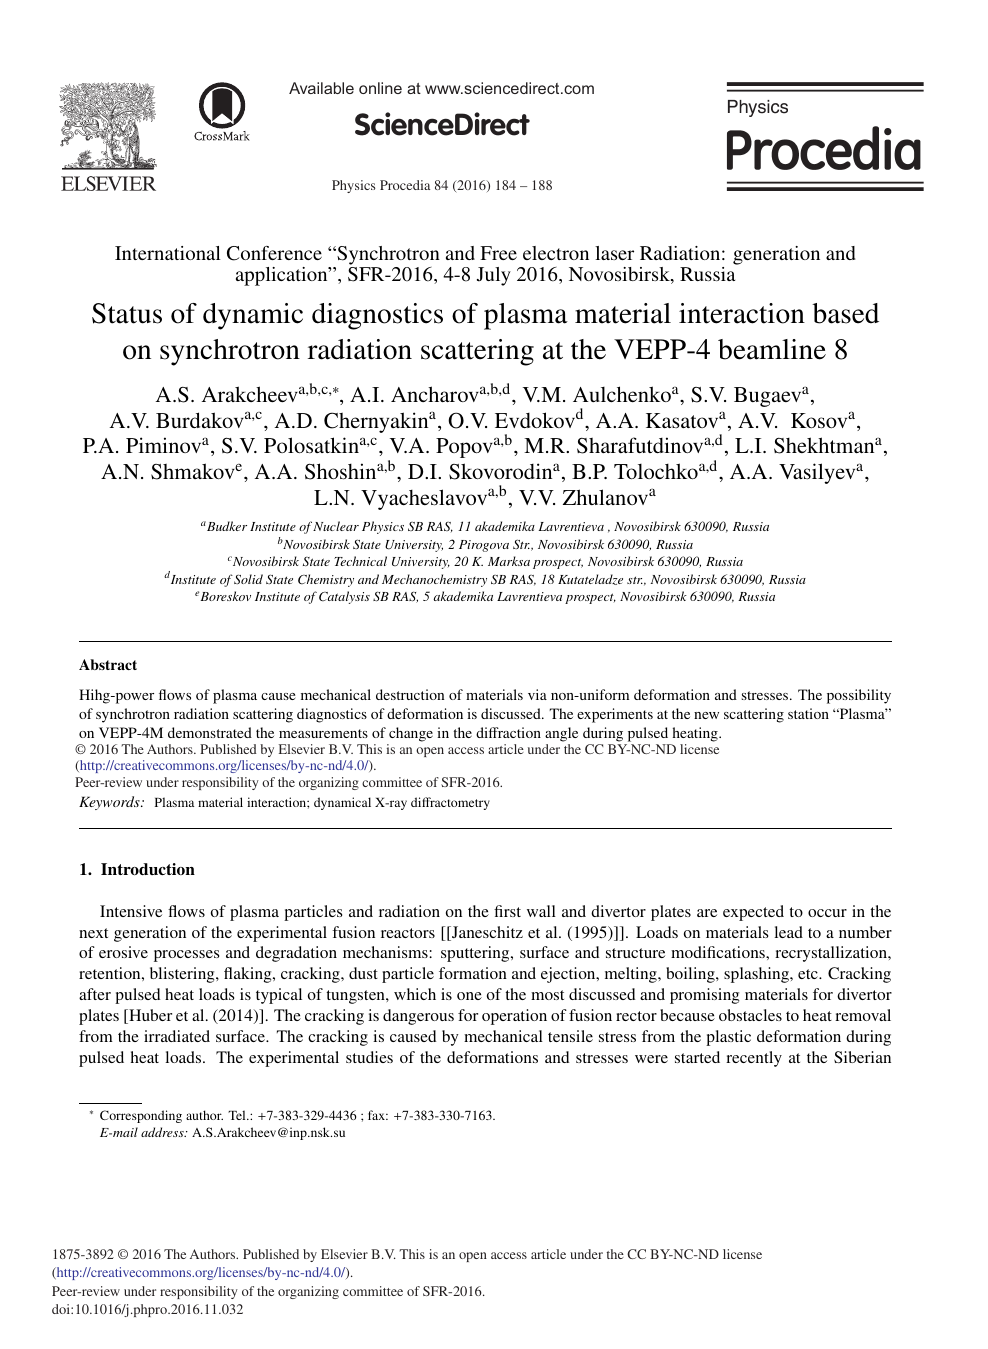 Status Of Dynamic Diagnostics Of Plasma Material Interaction Based On Synchrotron Radiation Scattering At The Vepp 4 Beamline 8 Topic Of Research Paper In Materials Engineering Download Scholarly Article Pdf And Read